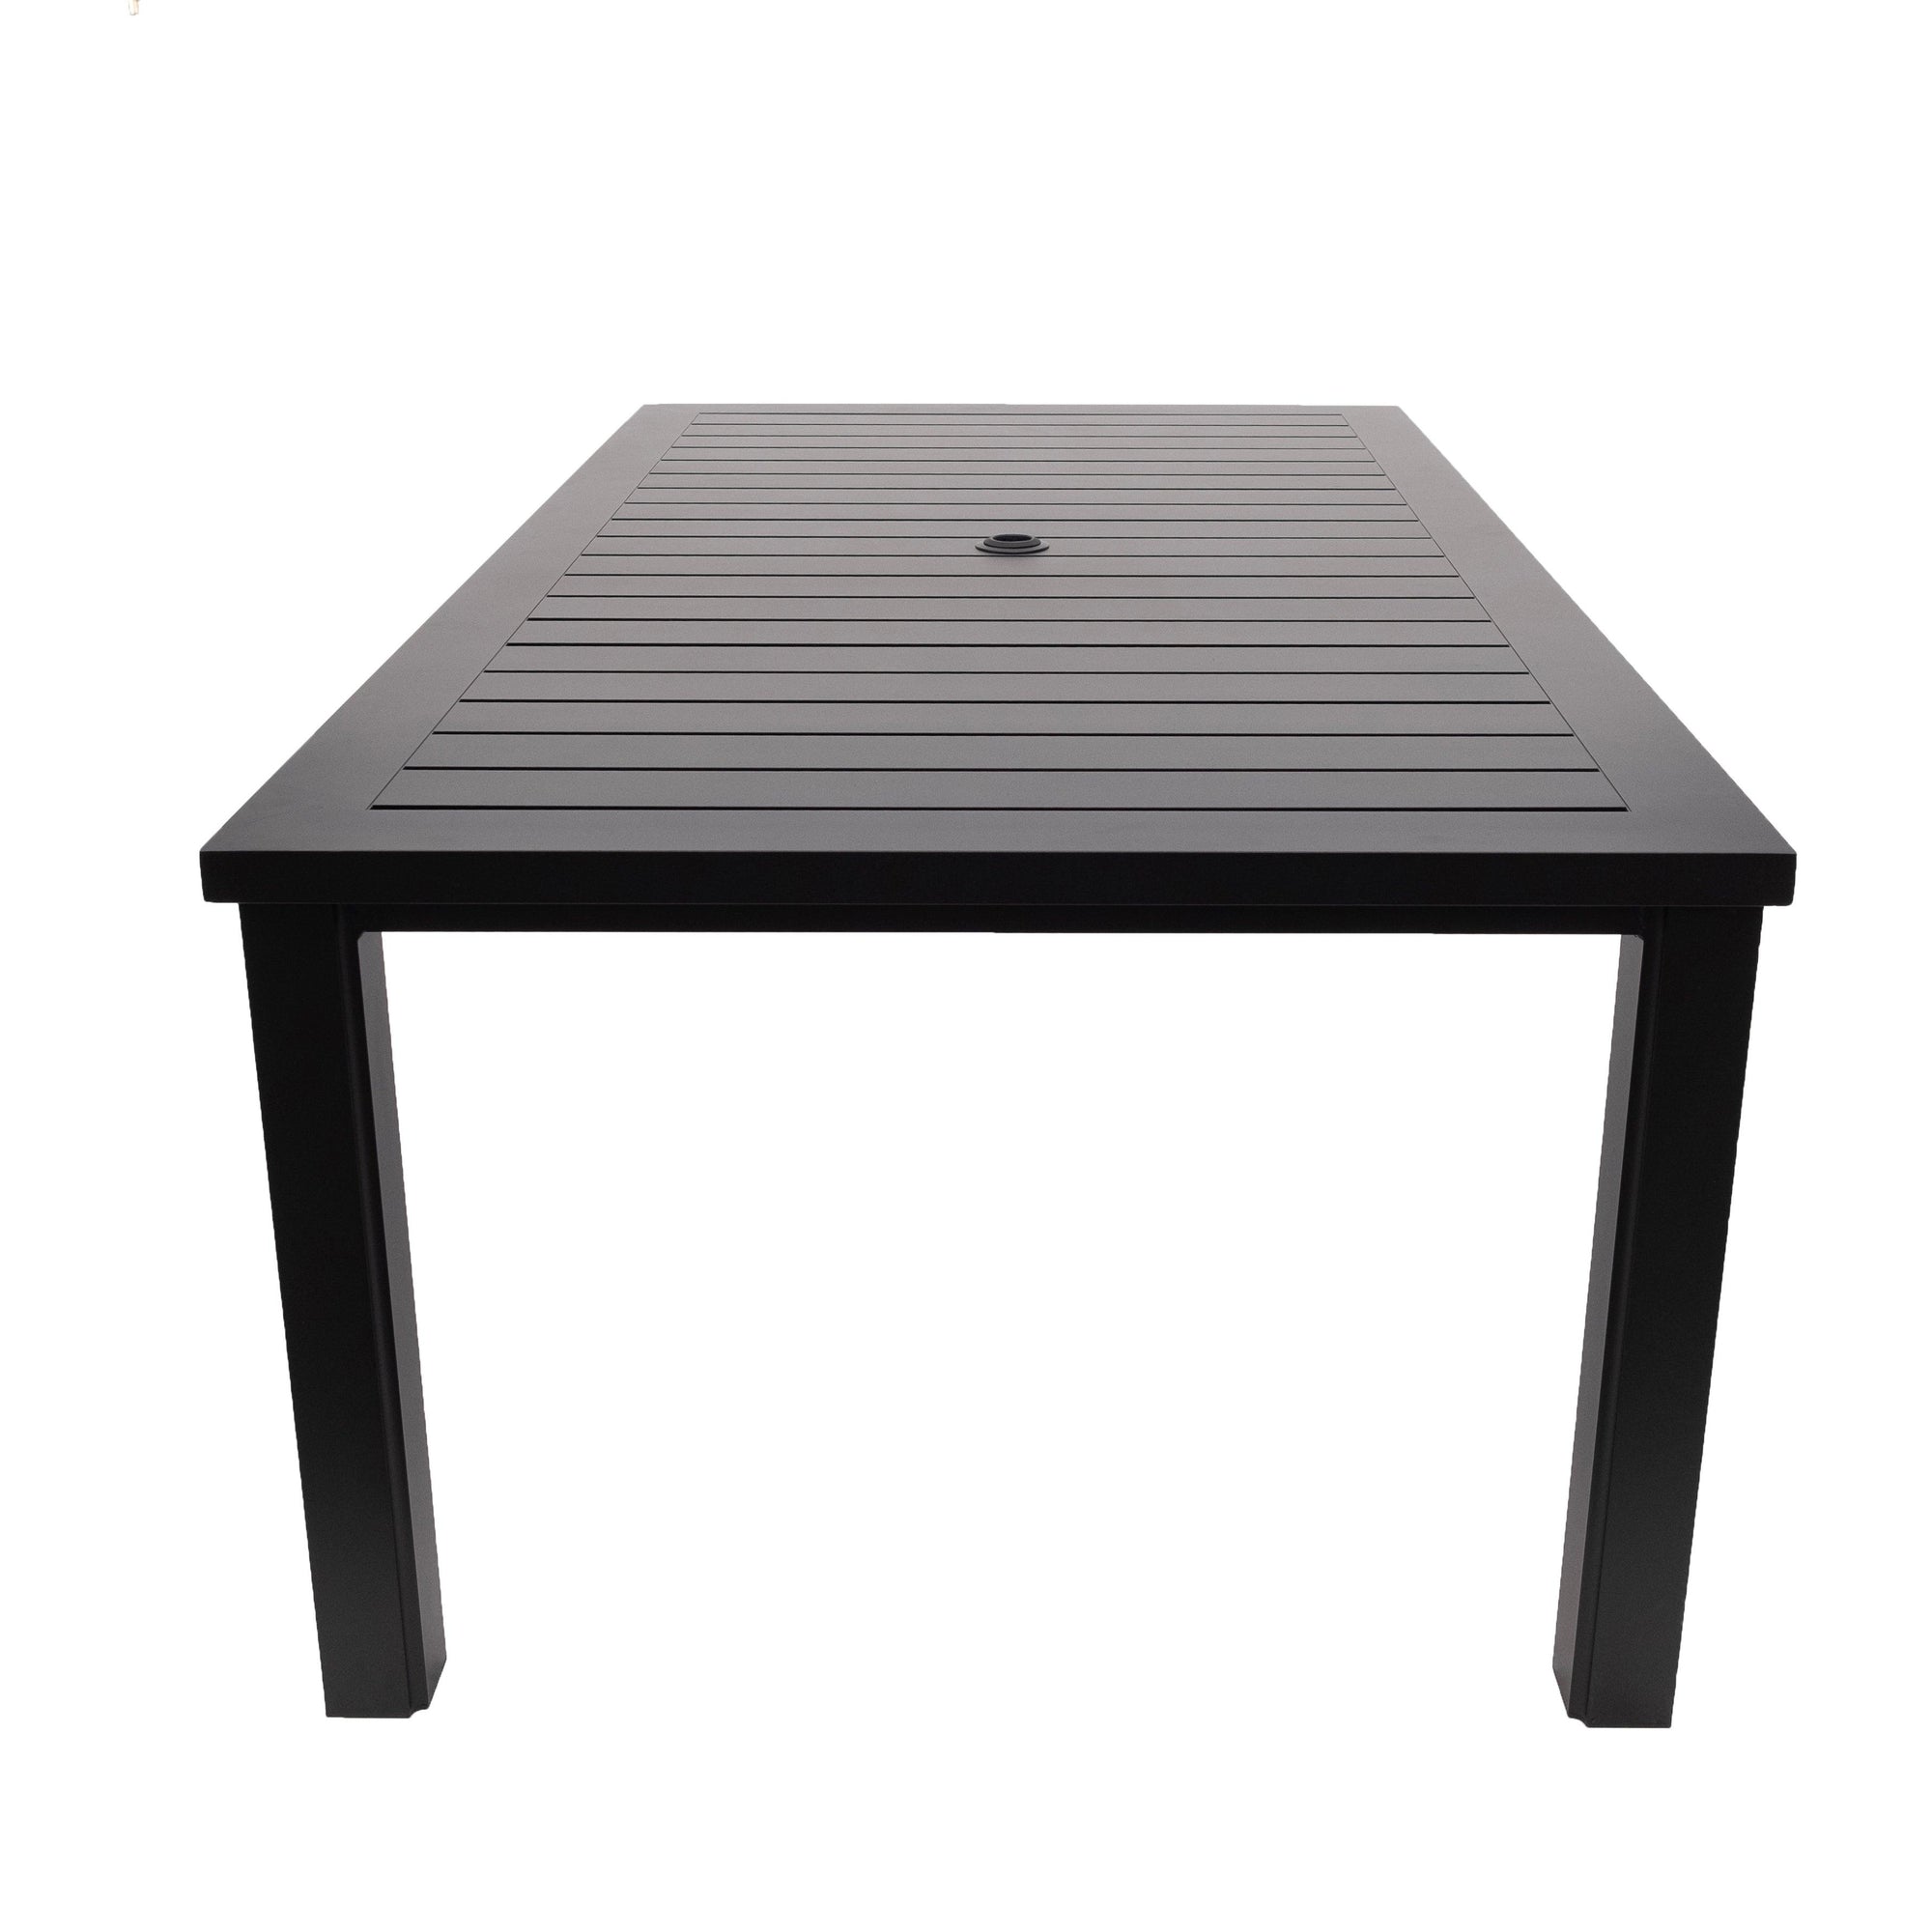 Make your outdoor living space look inviting with the Sherwood Rectangle Dining Table. This cast aluminum dining table is designed to be durable and weatherproof, allowing you to enjoy it year-round. Measuring 44in x 84in x 29in, it fits perfectly in any patio or garden.